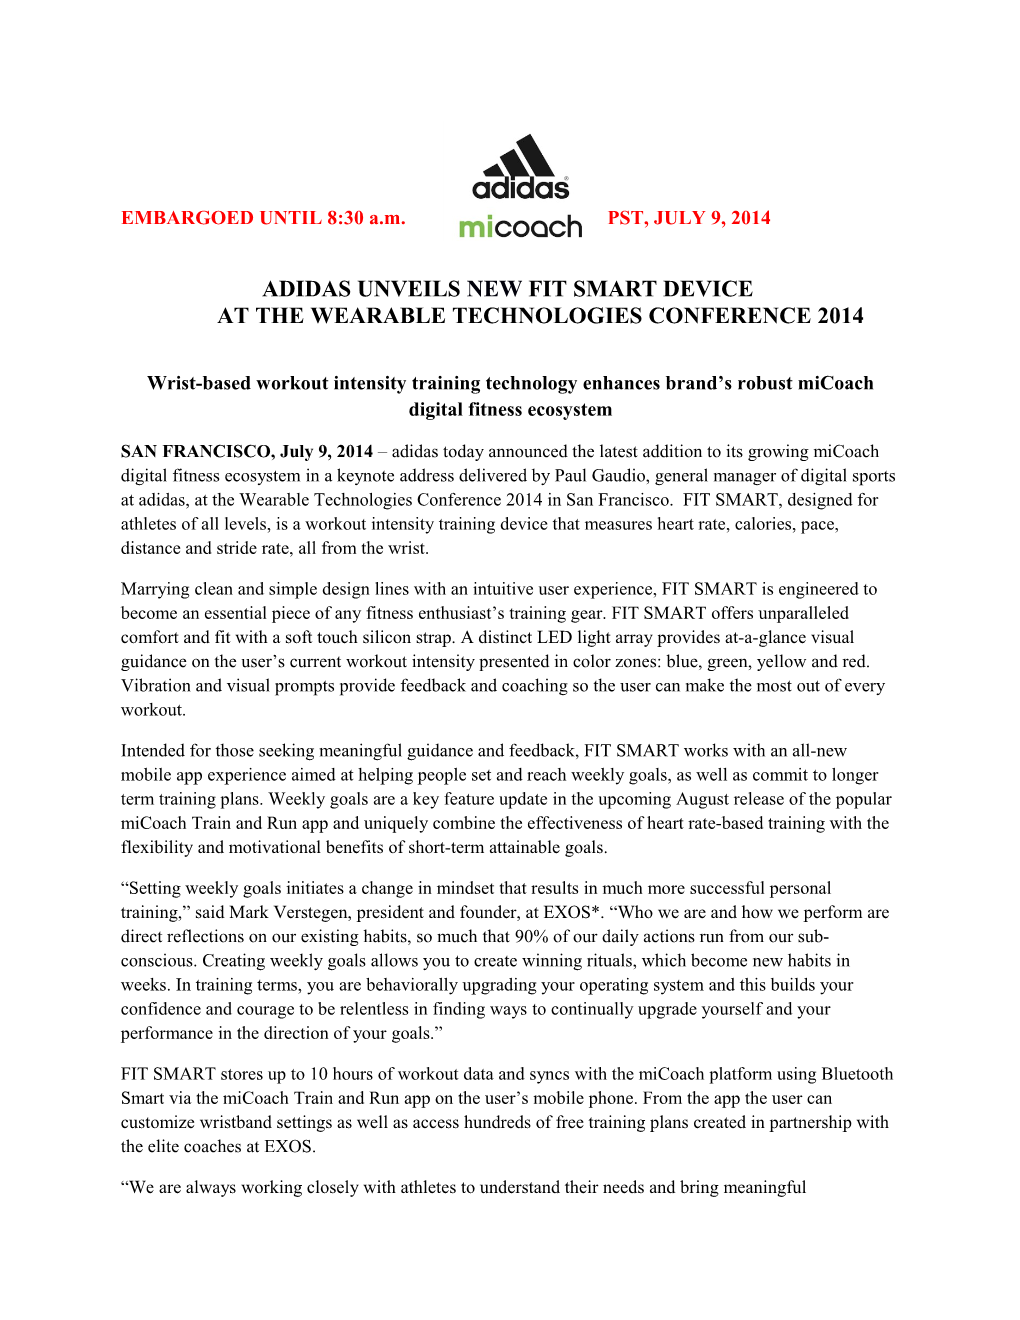 Adidas Unveils NEW Fit Smart Device at the Wearable Technologies Conference 2014